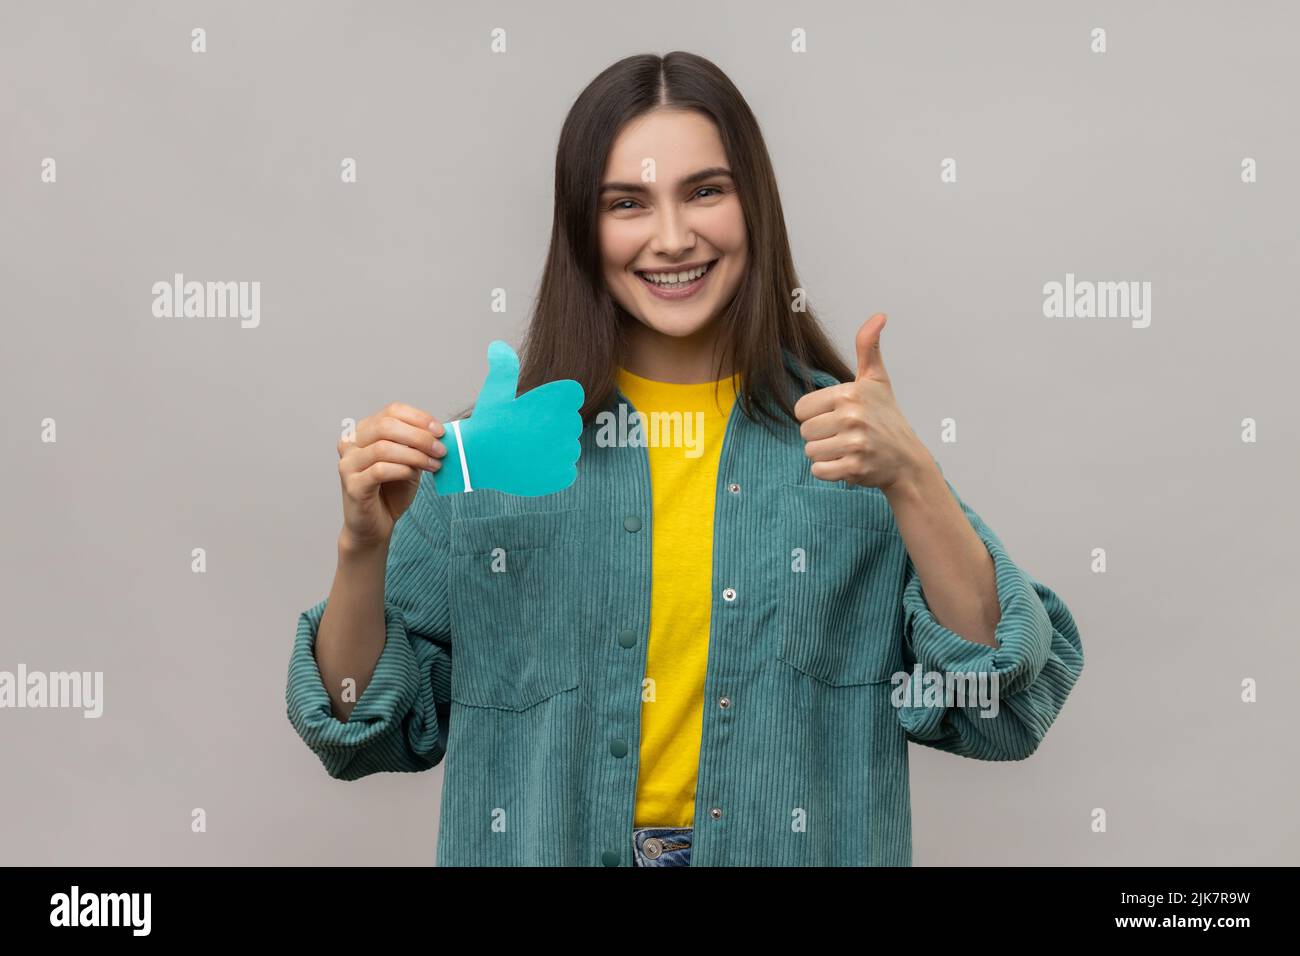 Woman blogger holding paper blue thumbs up sign, asking to rate her posts in social networks, happy satisfied expression, wearing casual style jacket. Indoor studio shot isolated on gray background. Stock Photo